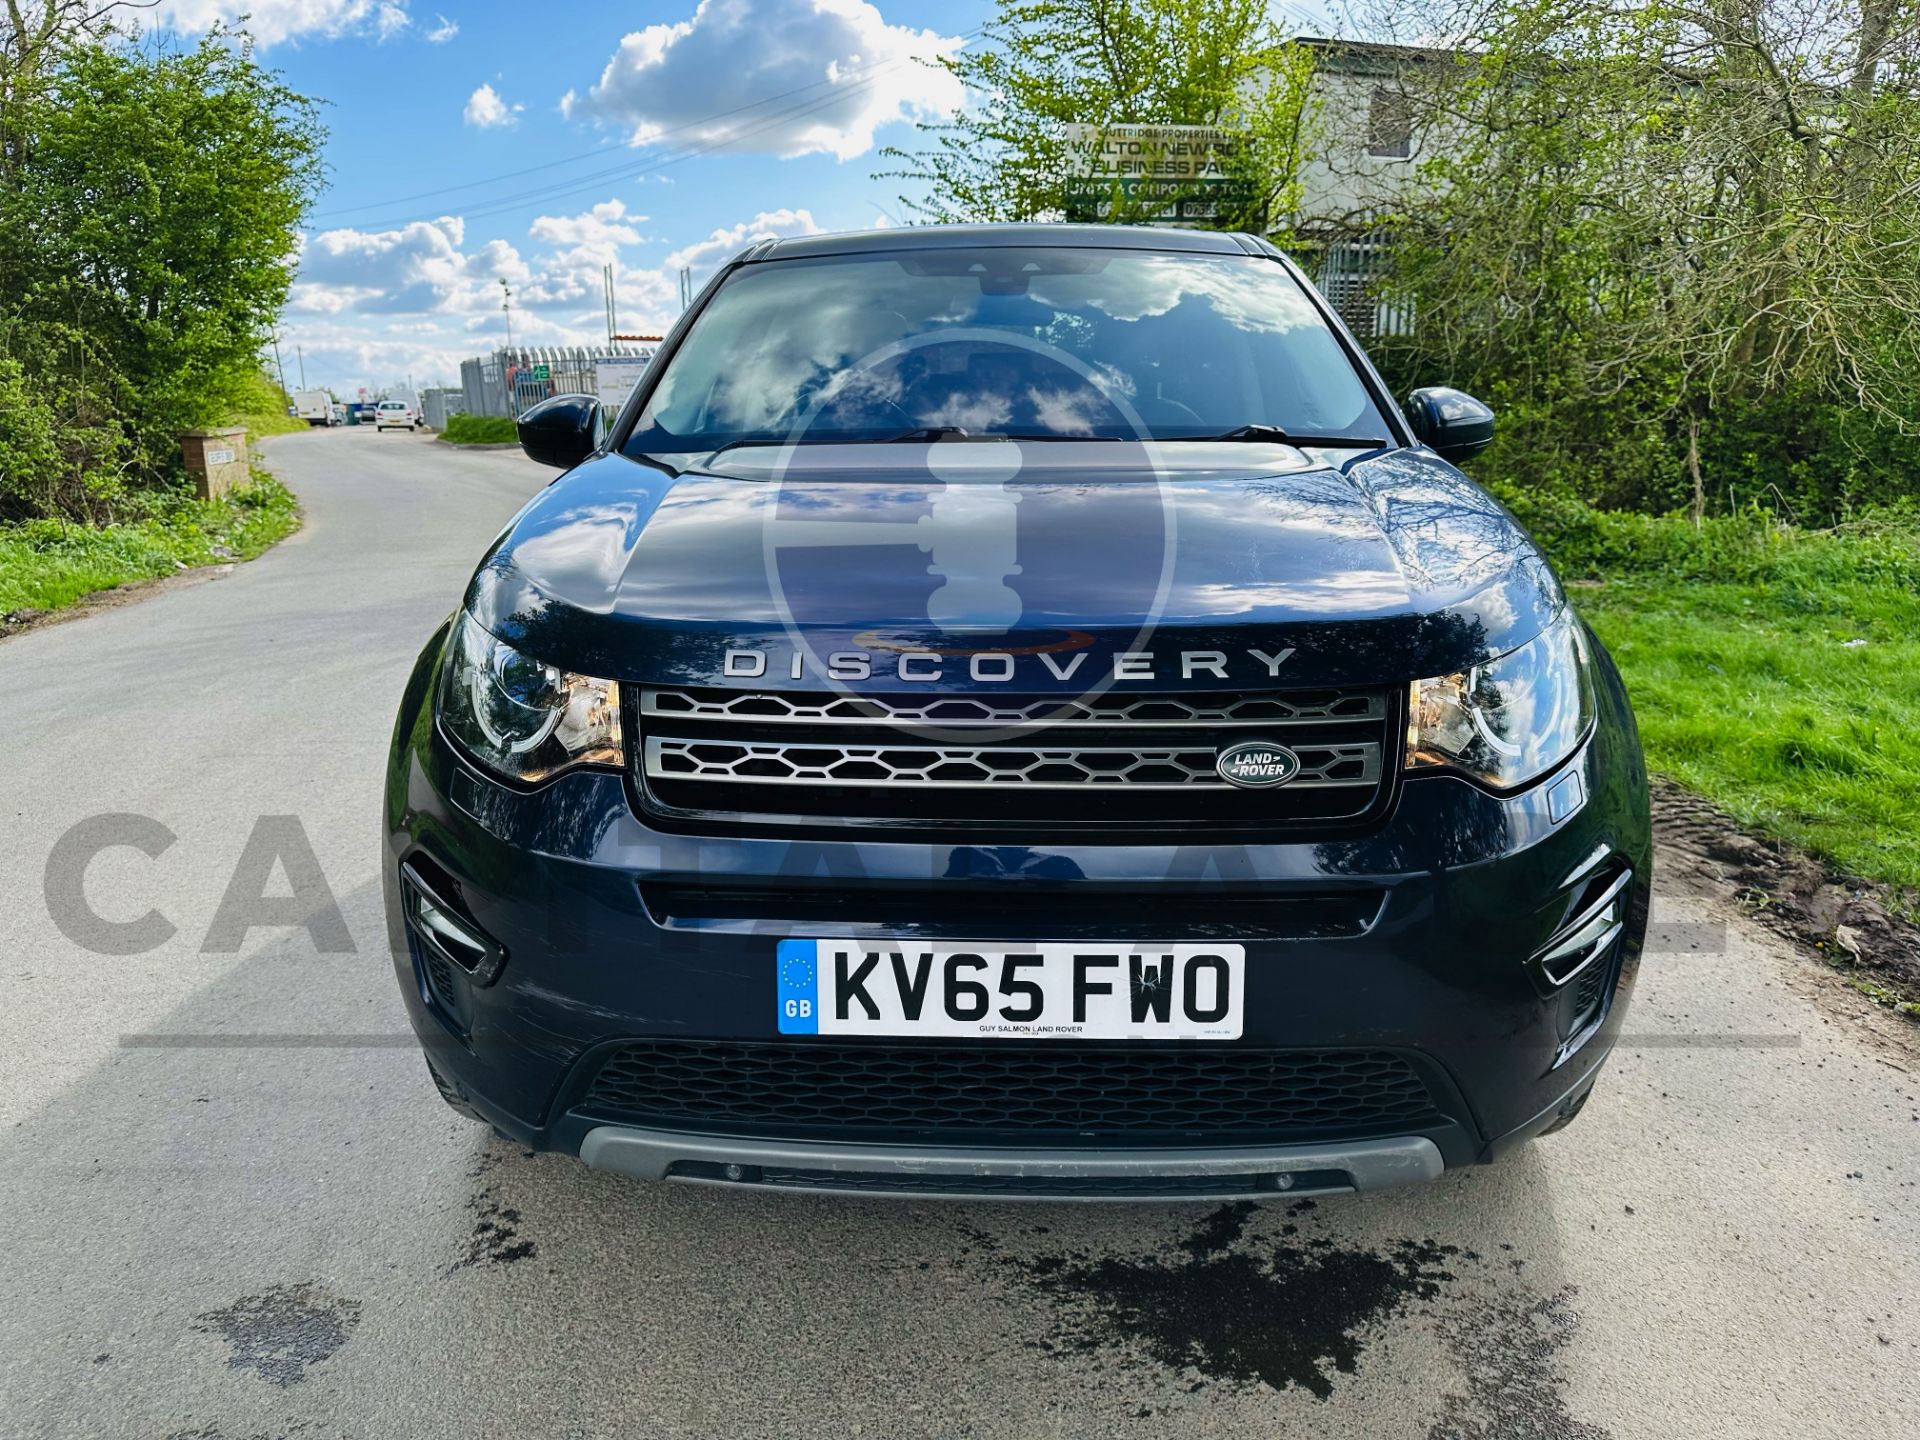 (ON SALE) LAND ROVER DISCOVERY SPORT *SE TECH* 7 SEATER SUV (2016 - EURO 6) 2.0 TD4 - (NO VAT) - Image 3 of 40